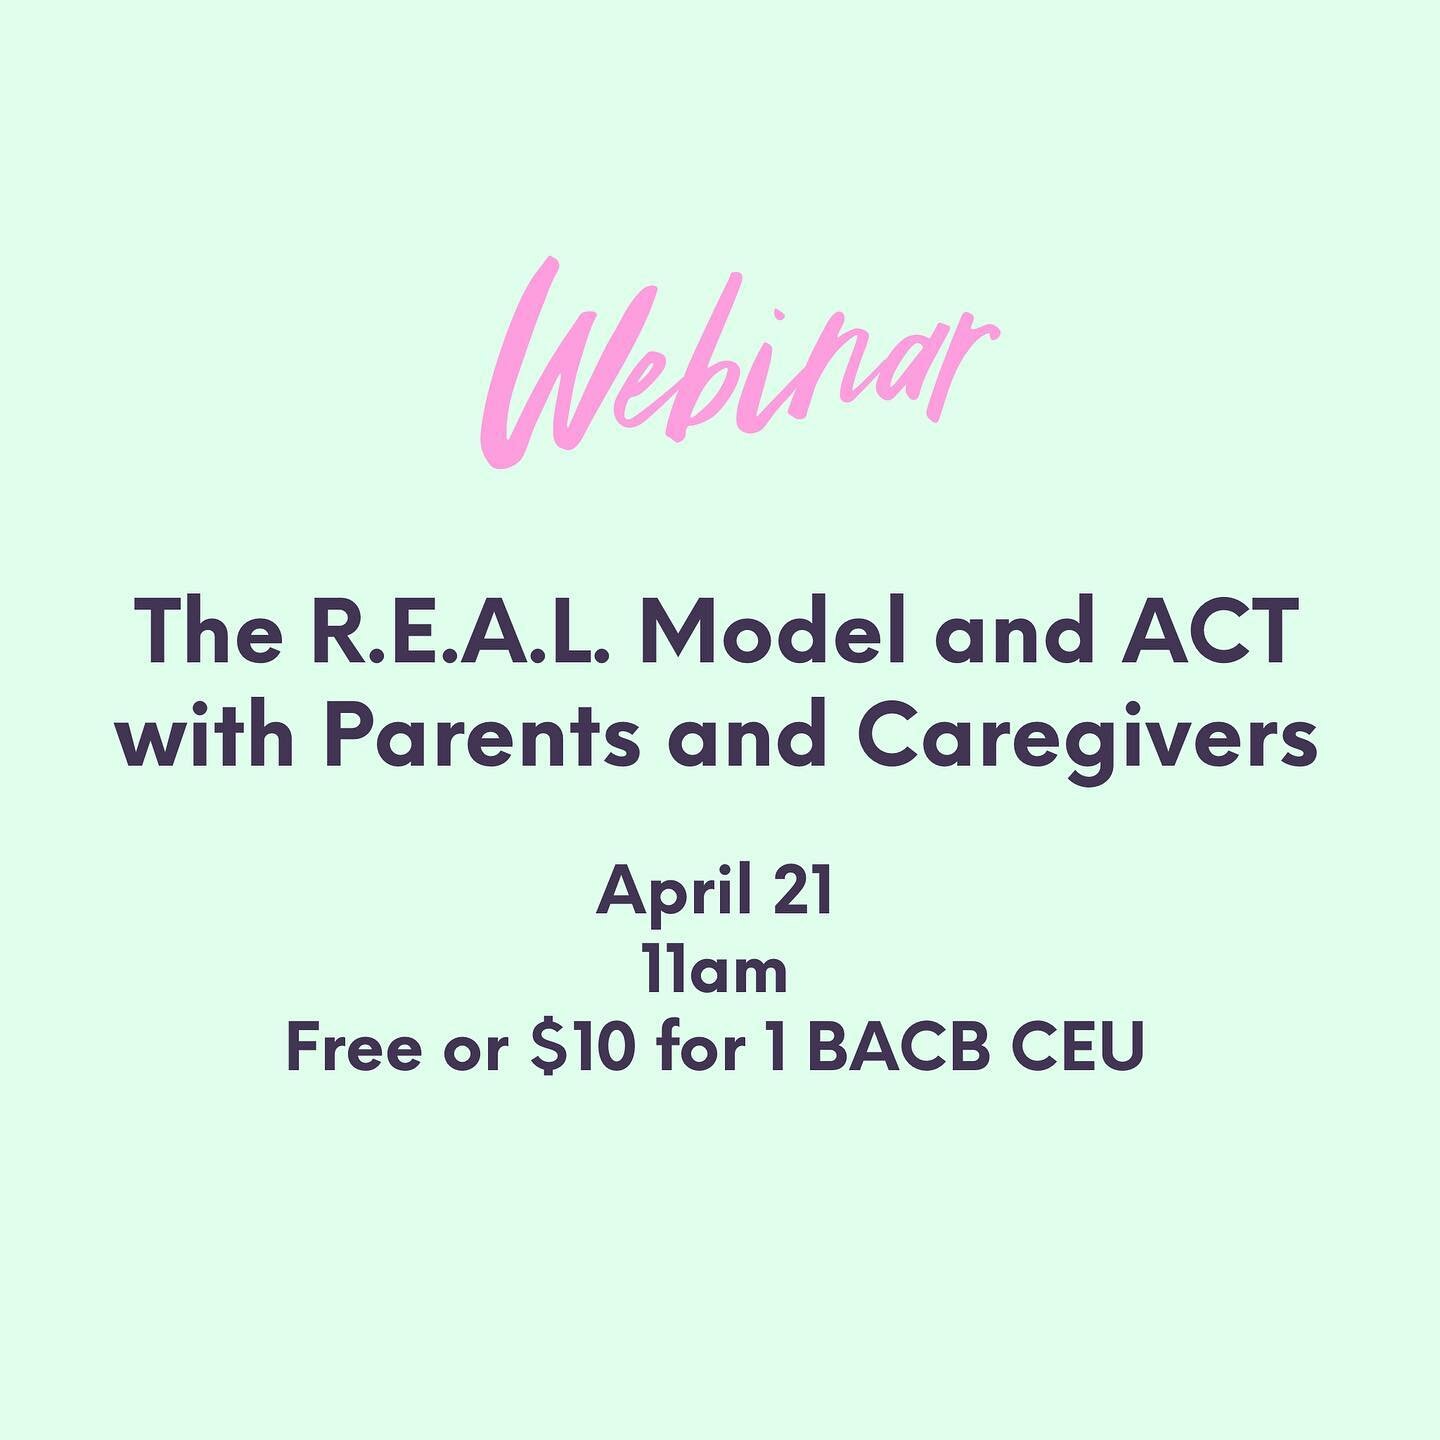 ✏️Join us for a webinar on using the @r.e.a.l.model + ACT in parent and caregiver training. Led by Mari Ueda-Tao, MA, BCBA, this training is FREE or $10 to receive 1 BACB Learning CEU. Register at the link in bio to save your spot! ✏️